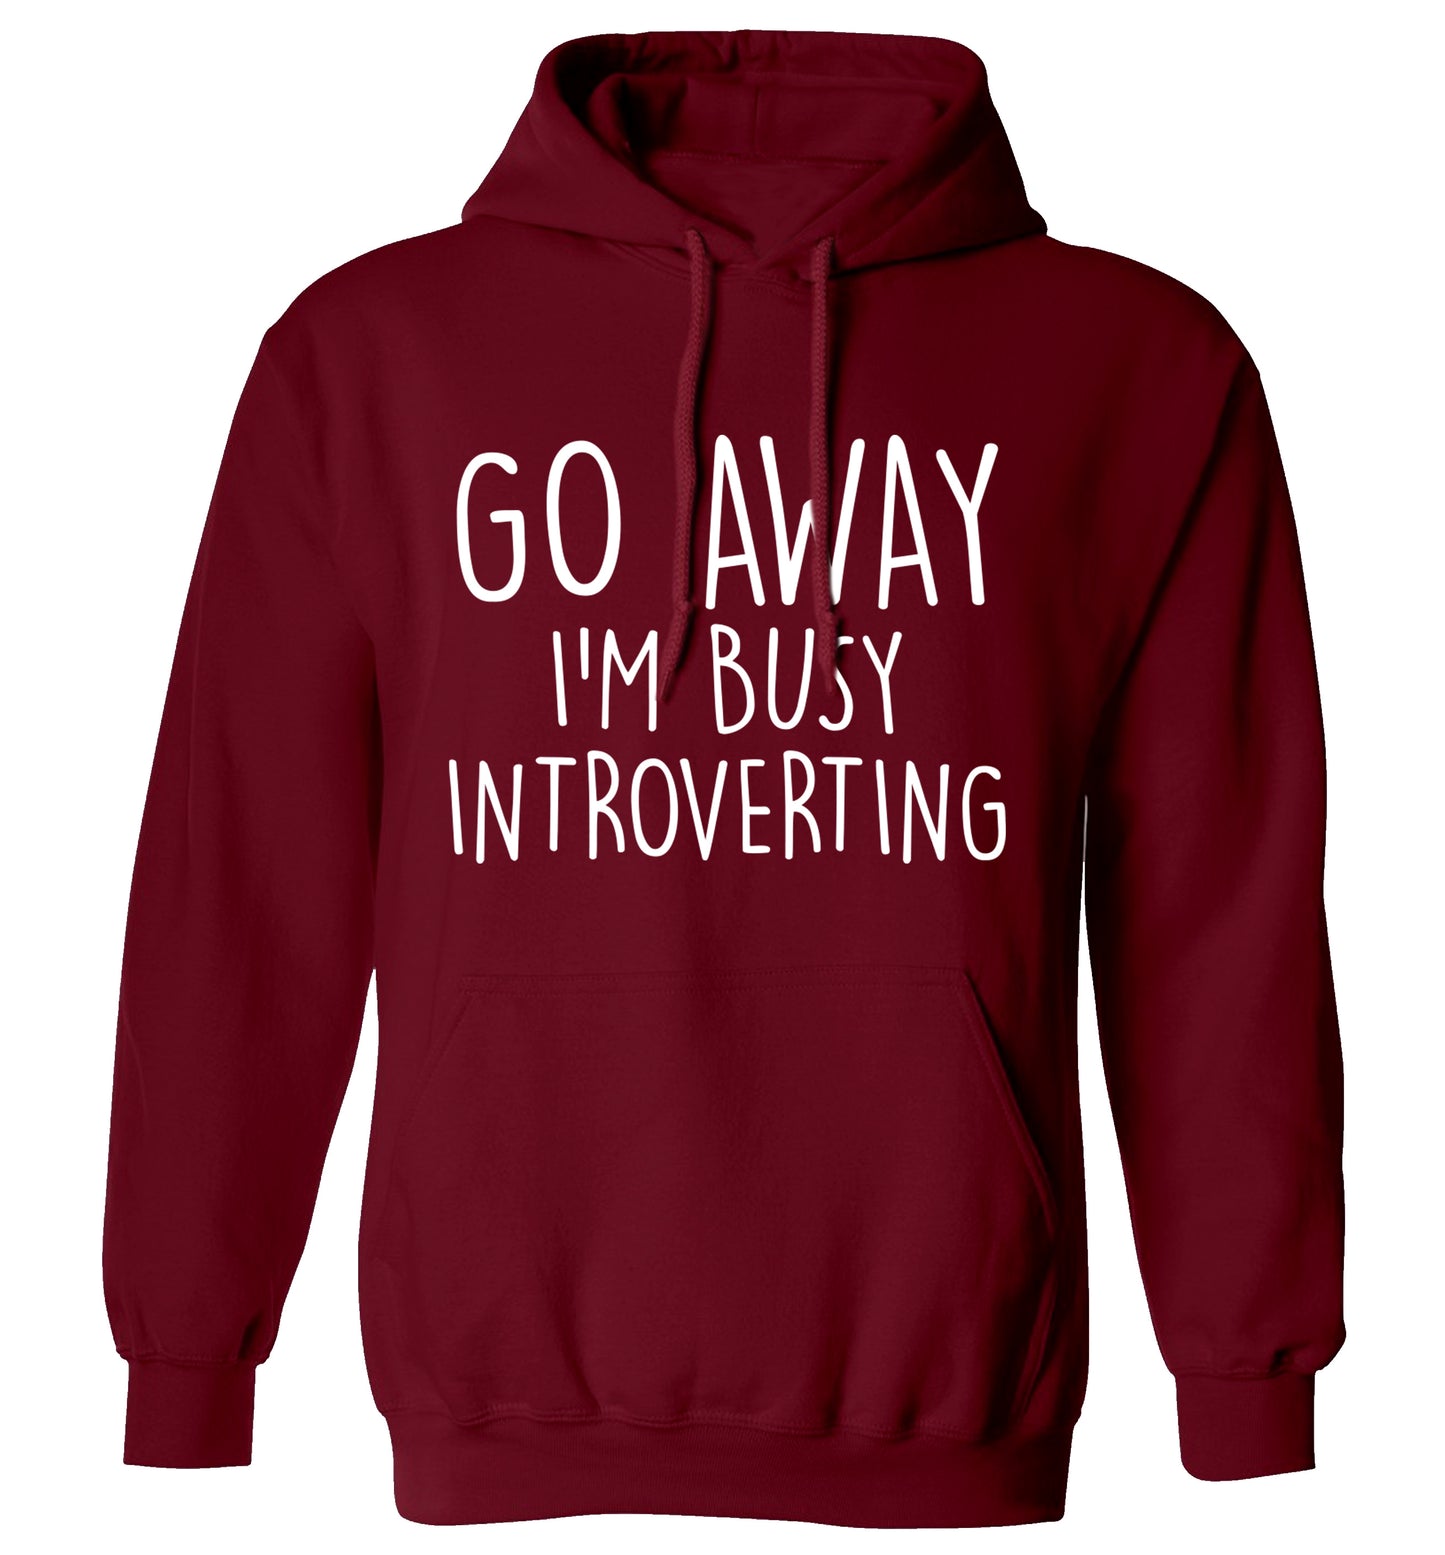 Go away I'm busy introverting adults unisex maroon hoodie 2XL